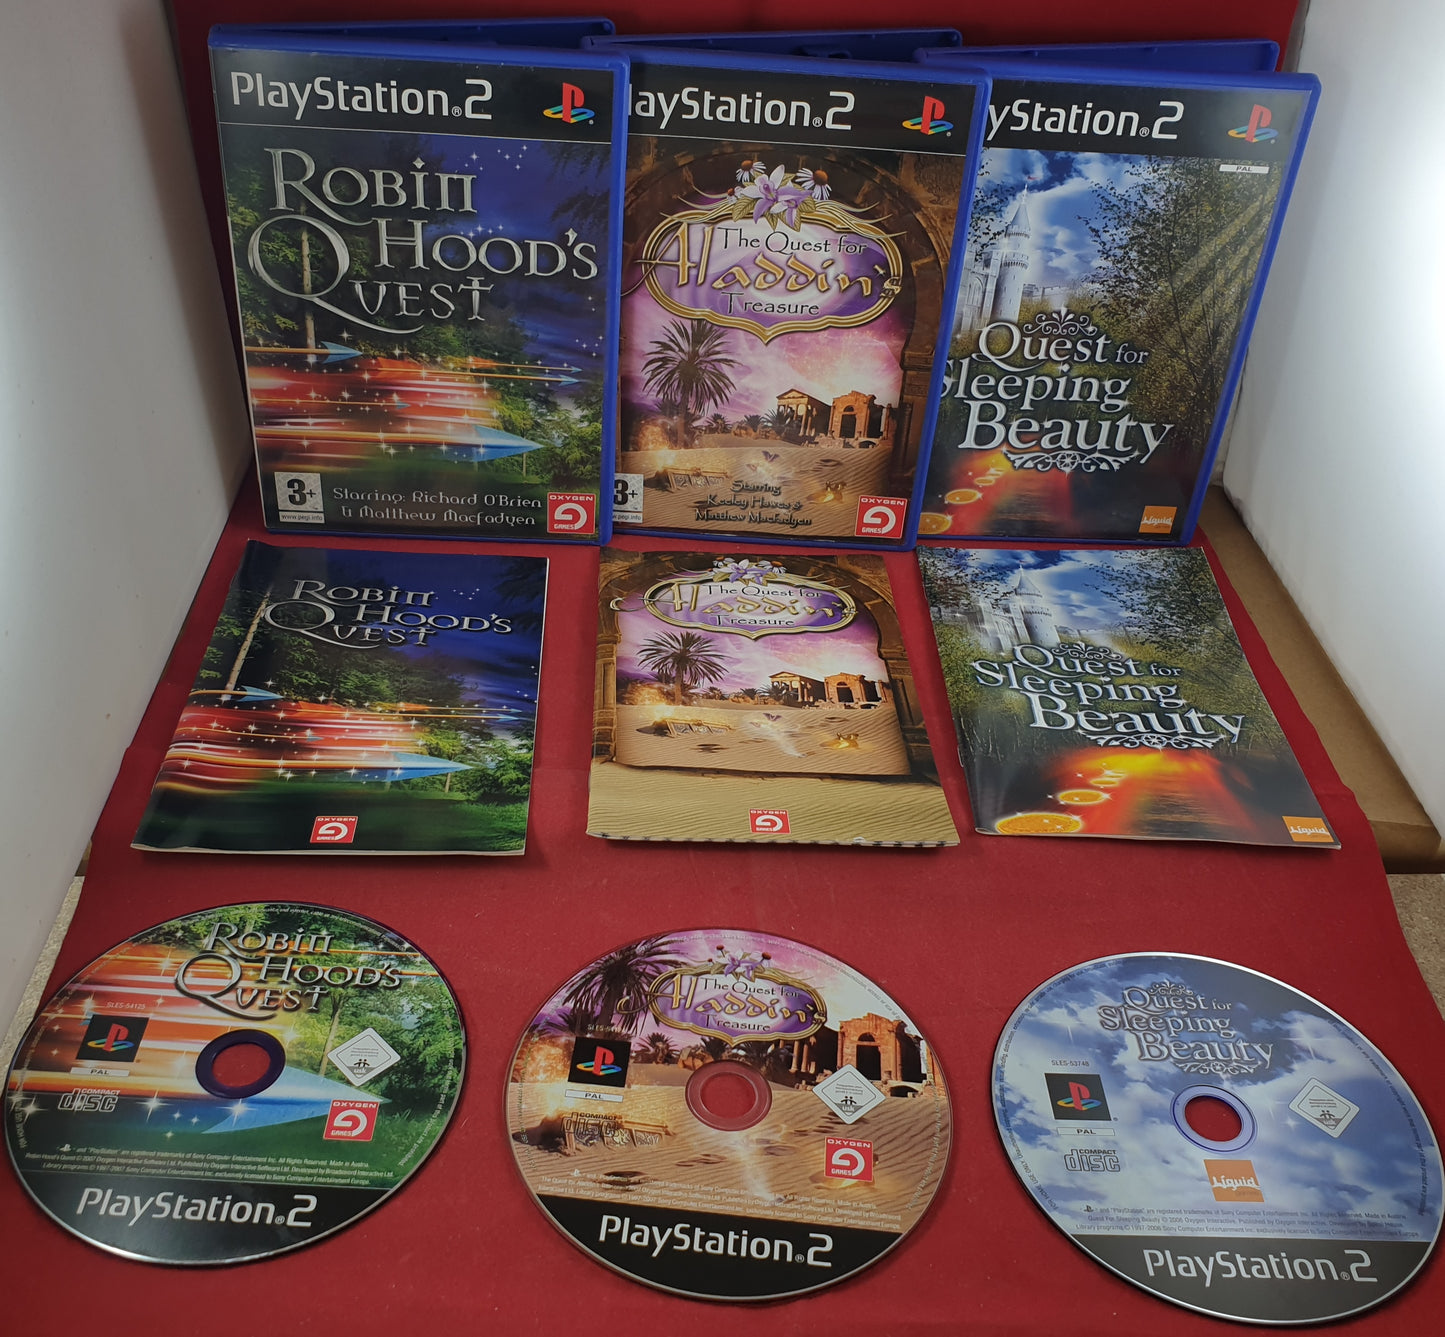 Quest for Sleeping Beauty, Robin Hood & Aladdin Sony PlayStation 2 (PS2) Game Bundle